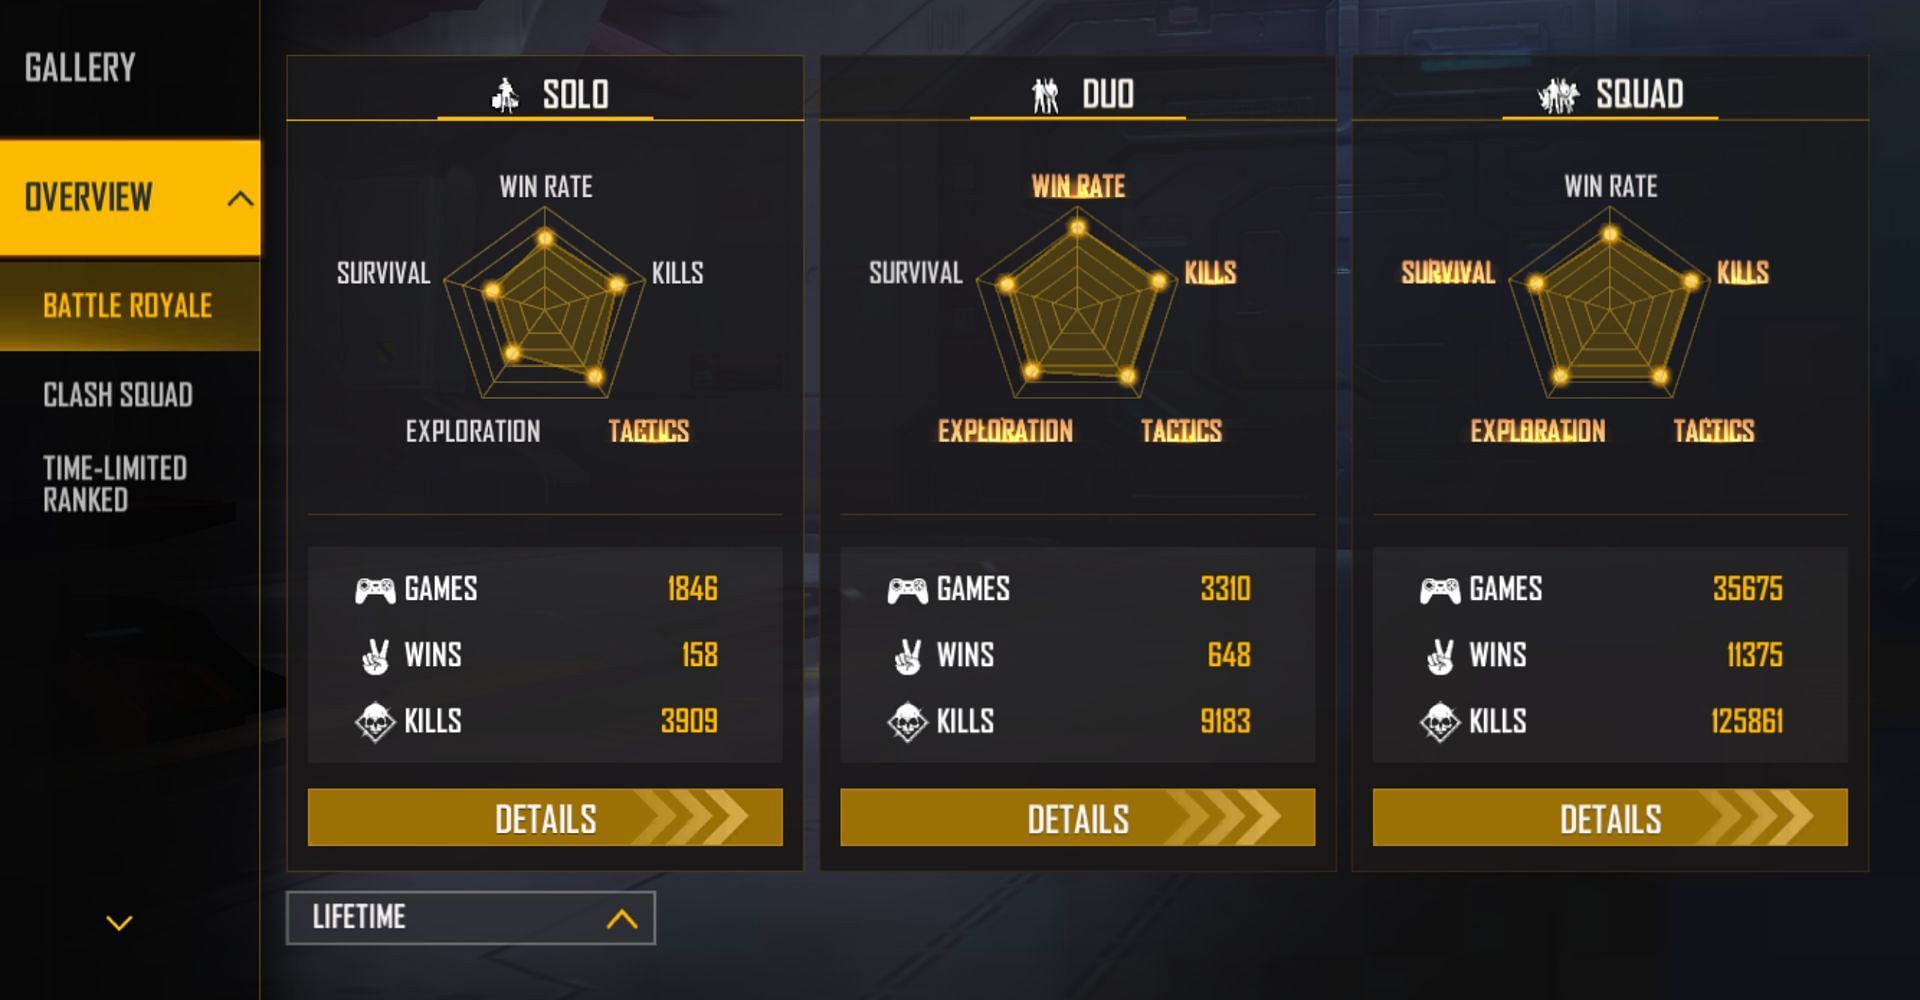 Lifetime stats in the battle royale mode of the game (Image via Garena)